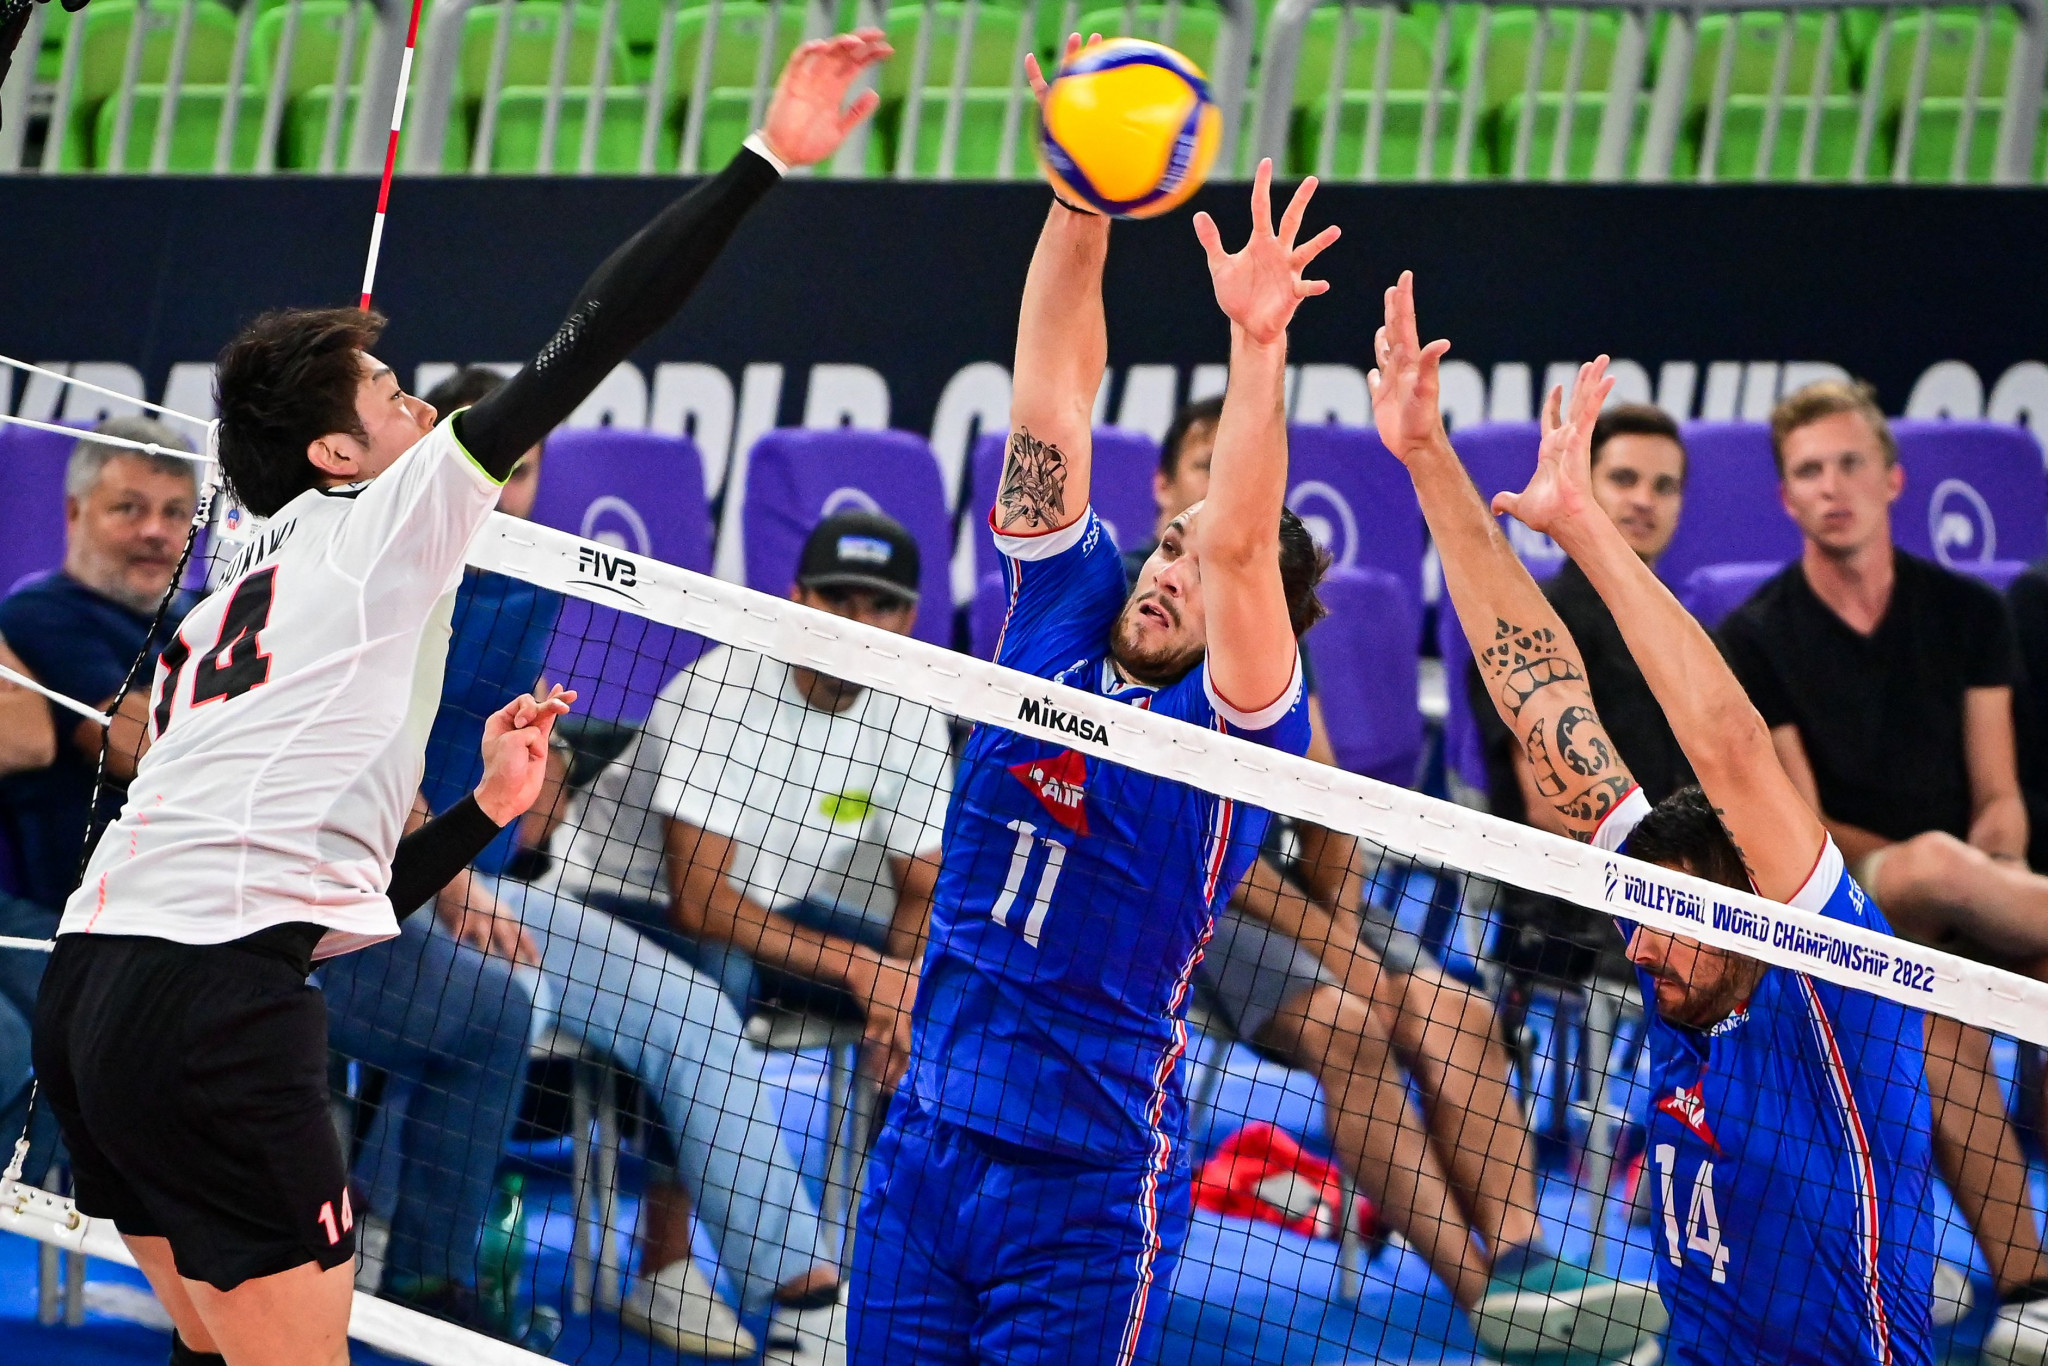 France beat Japan in five sets to reach the Men's Volleyball World Championship quarter-finals ©Getty Images